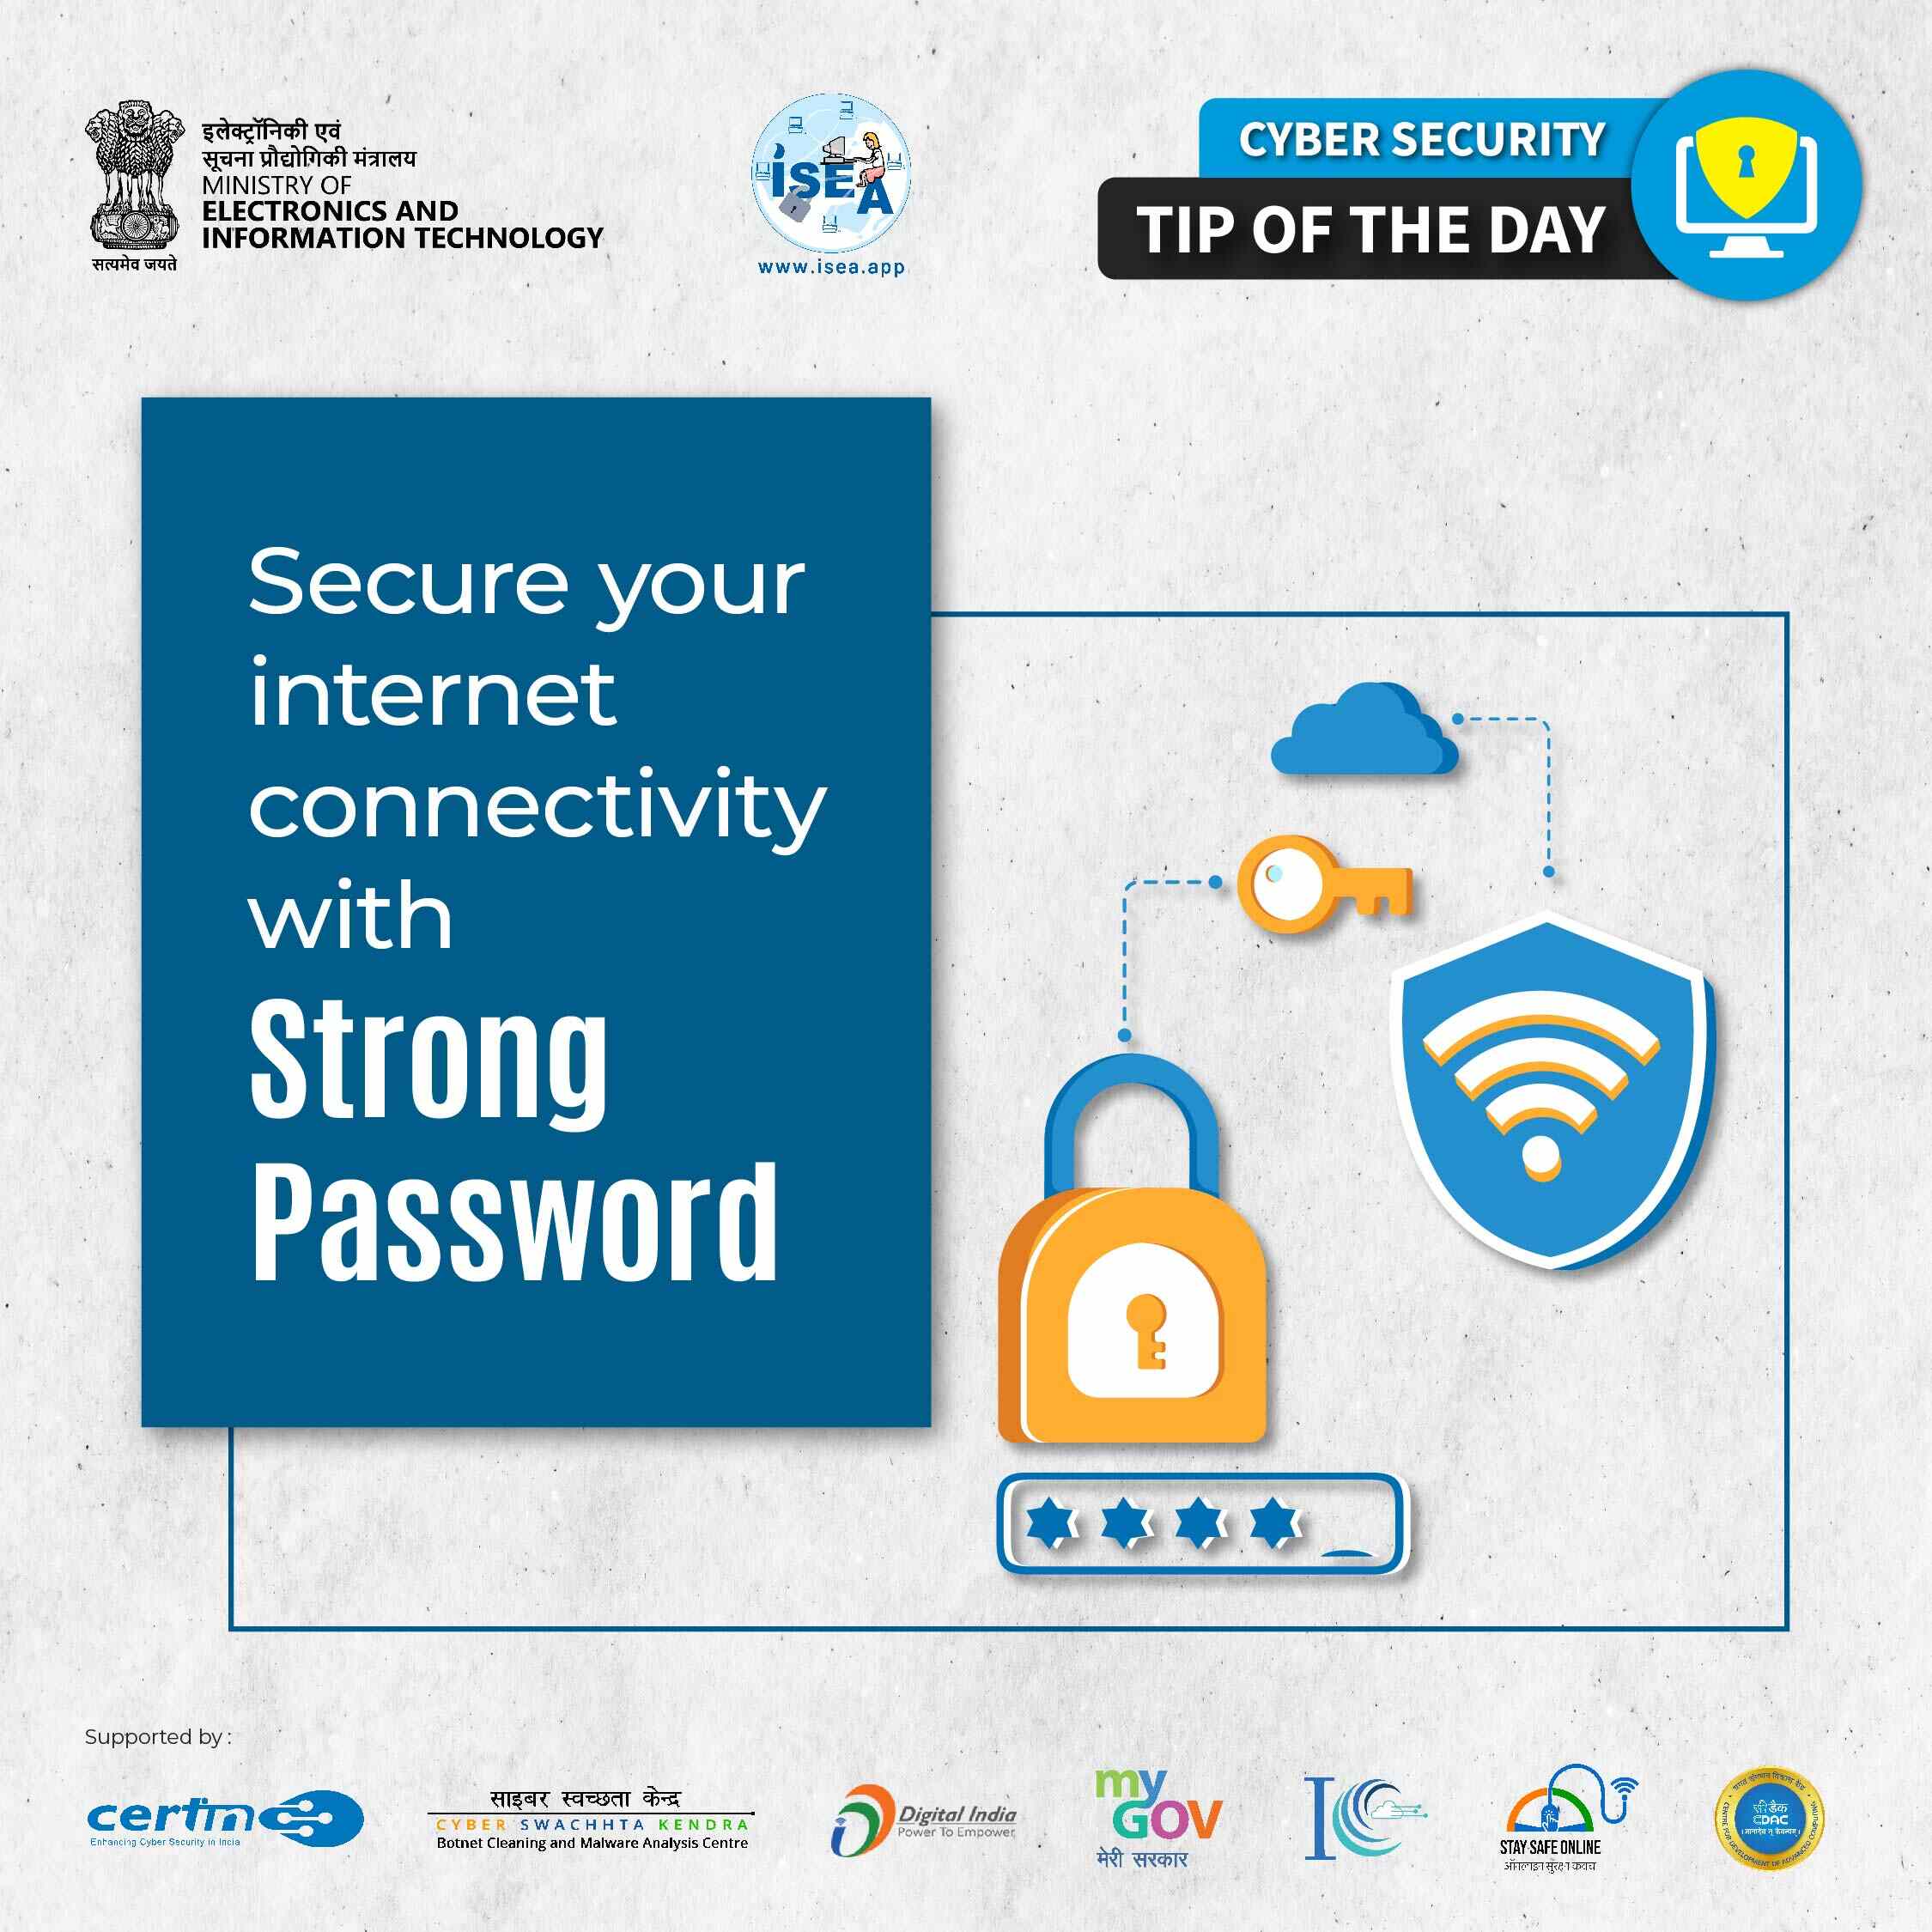 Cyber Security Tip of the Day 21